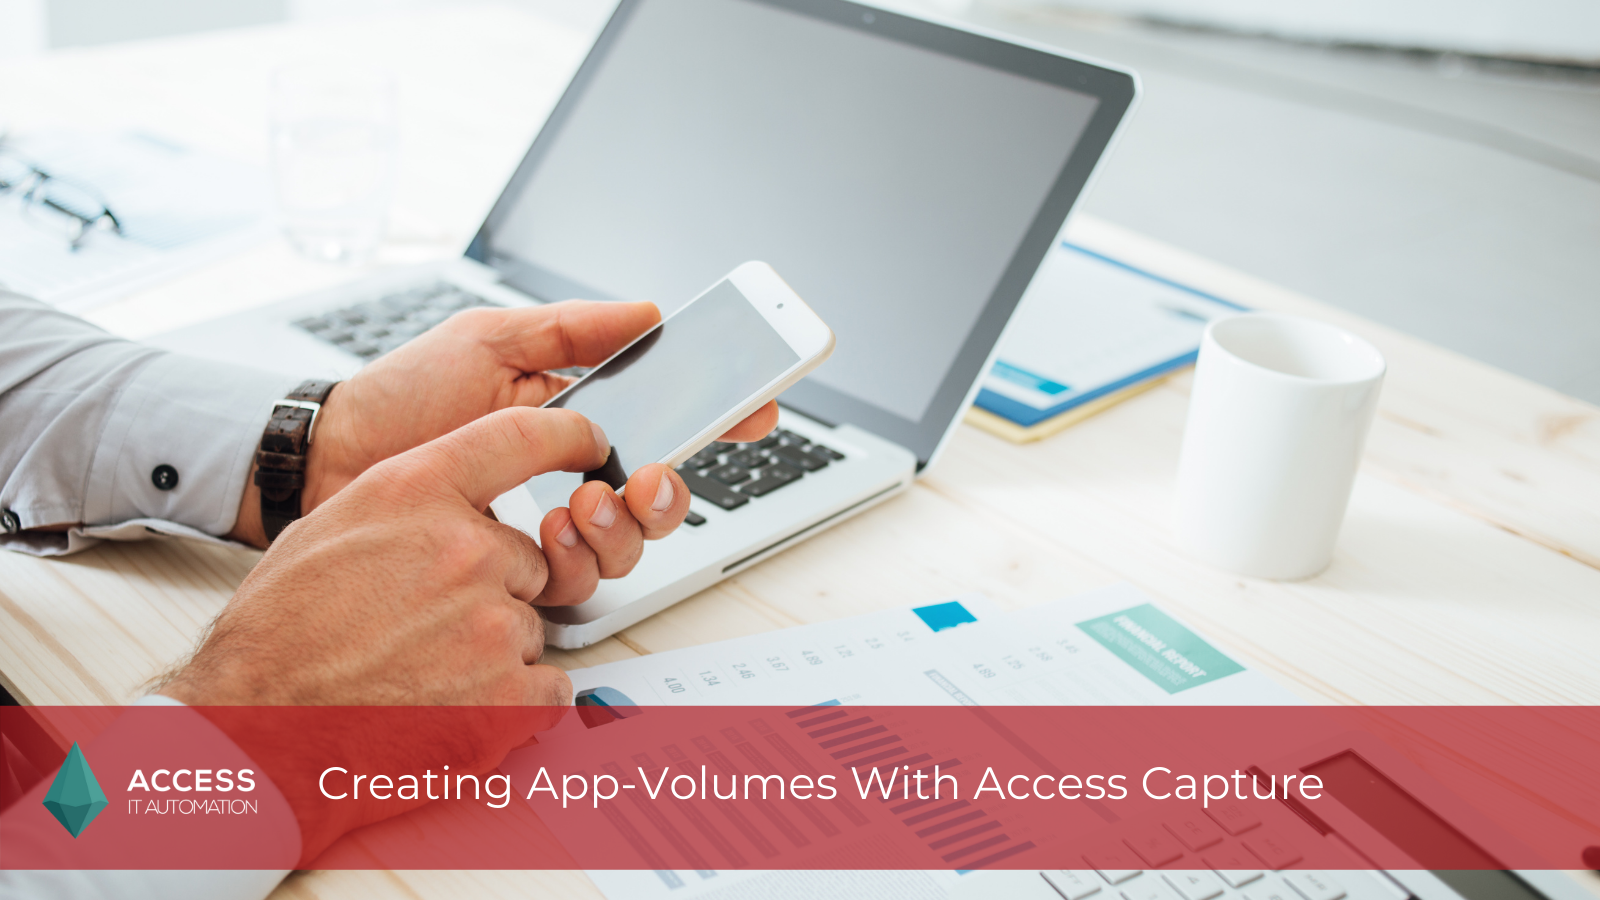 Creating App-Volumes With Access Capture